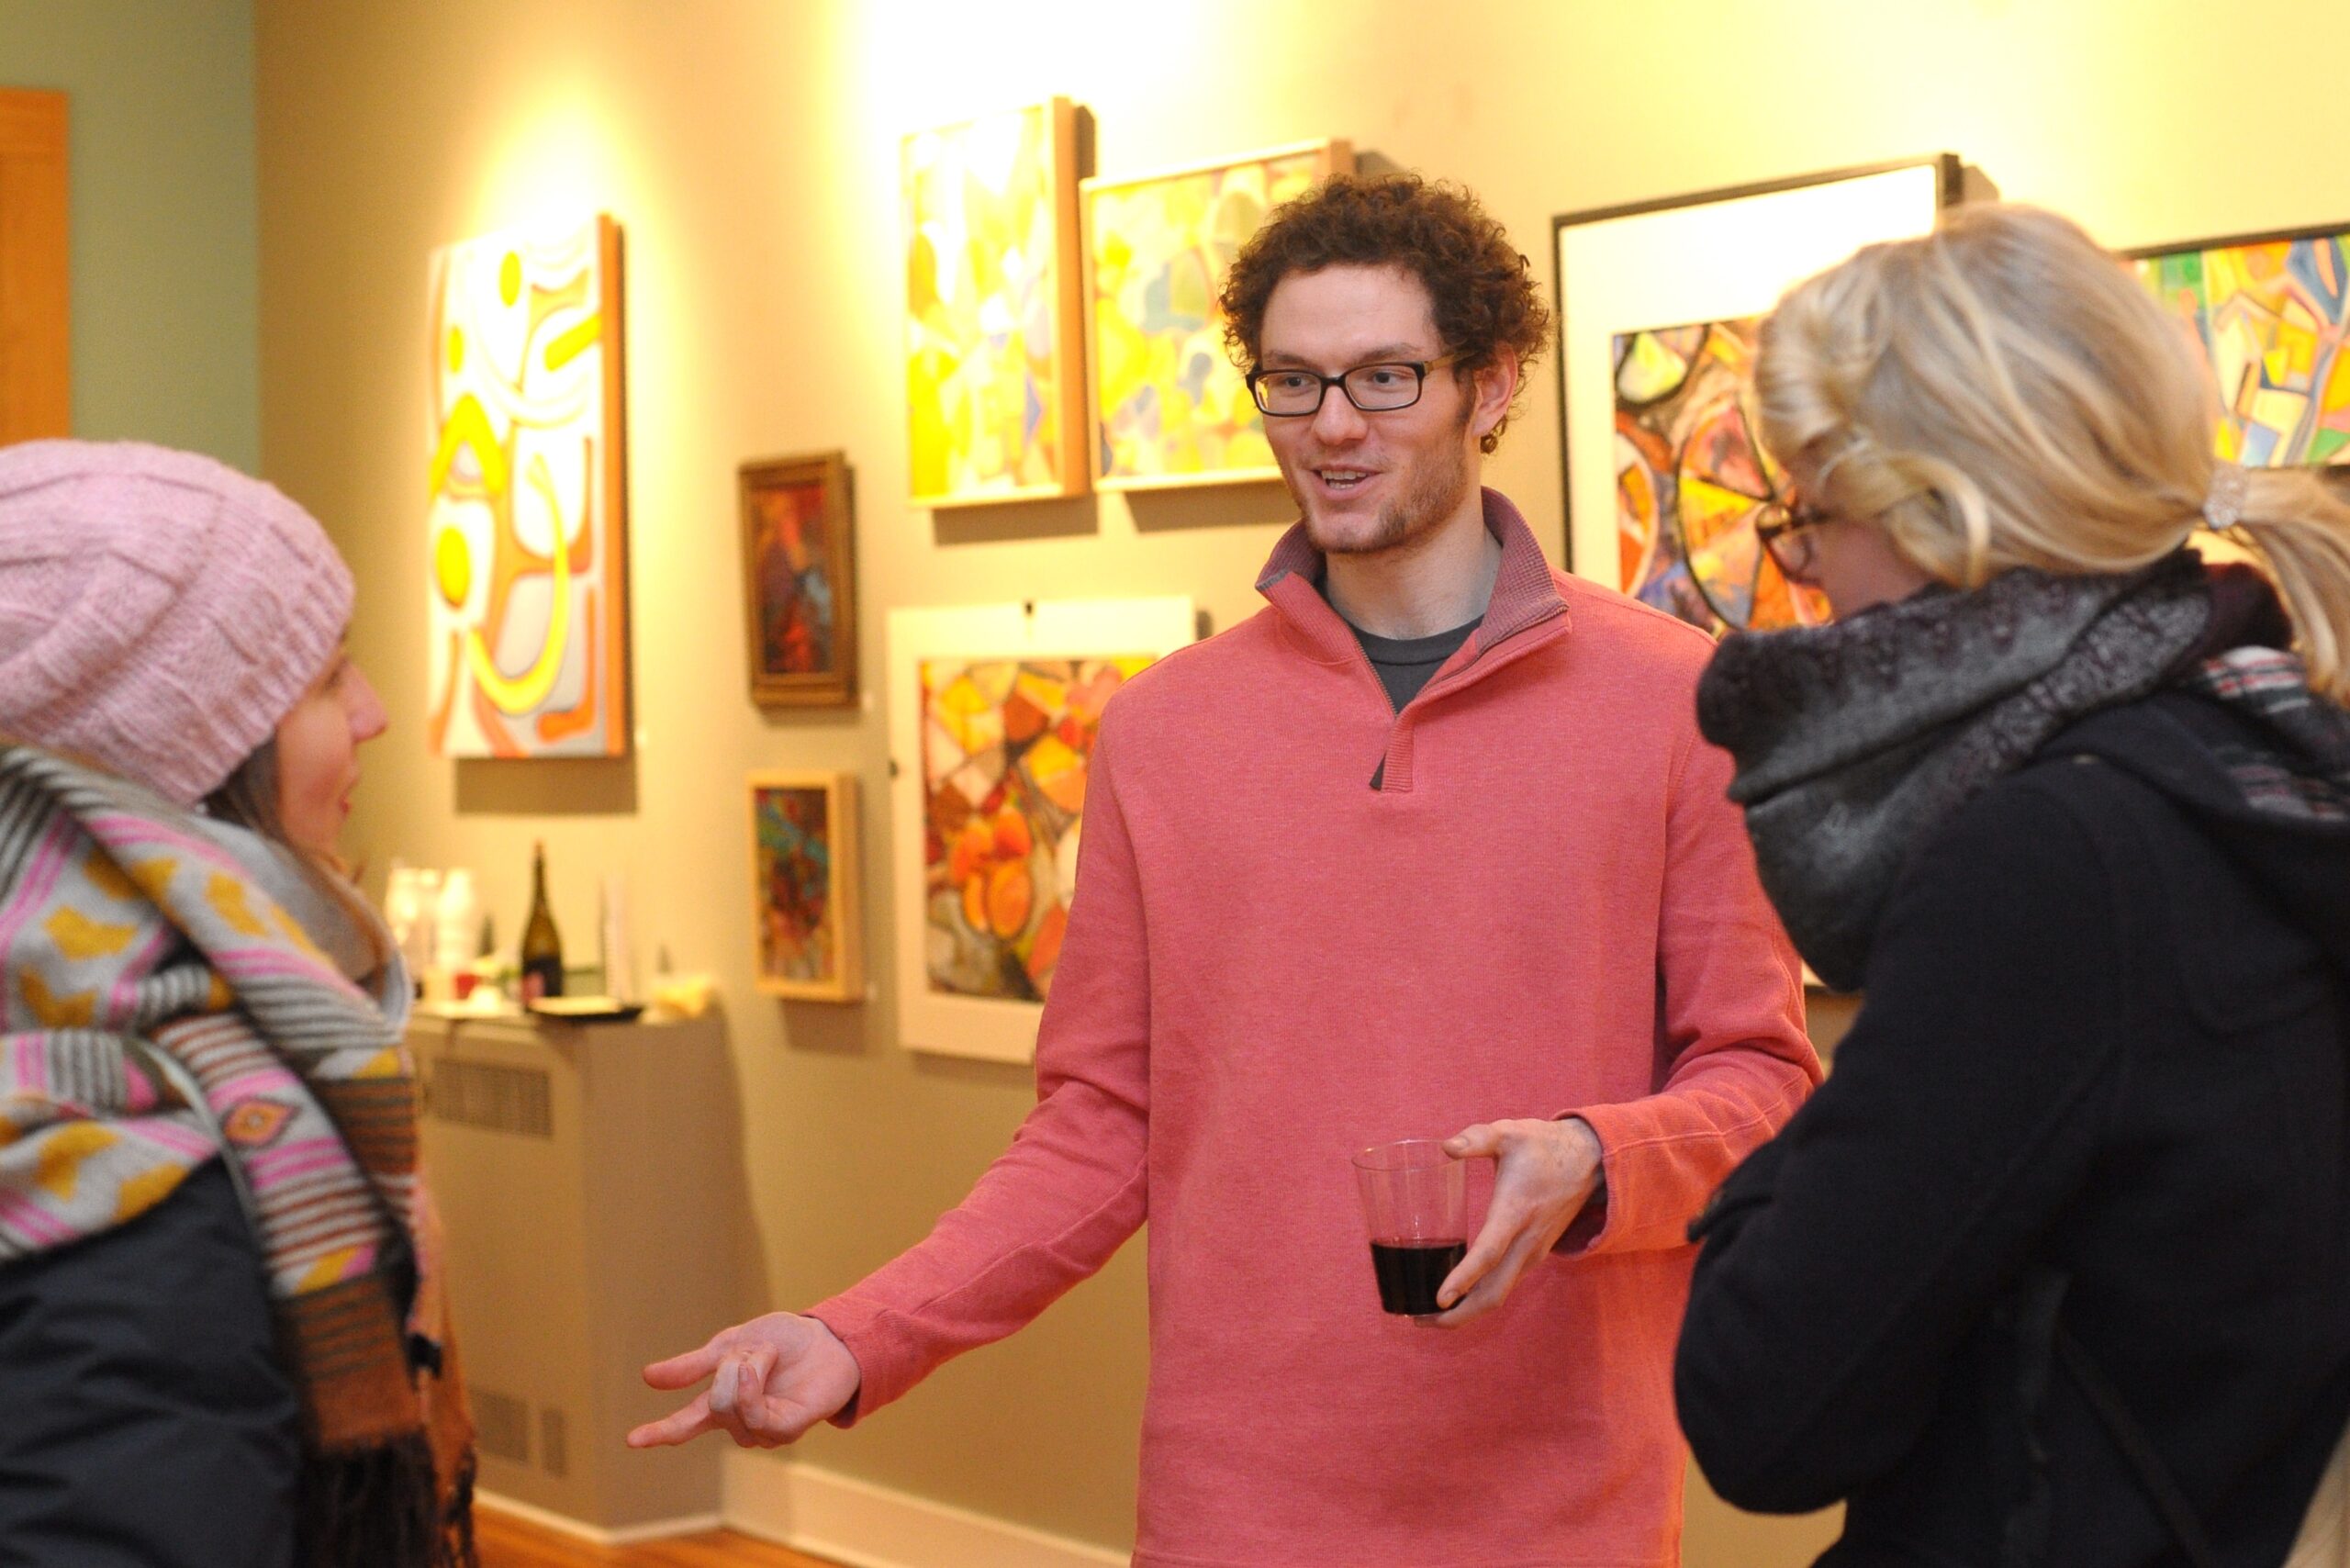 Noah Glenn shooting the breeze with Emma Walesh and Brianna Haupt during Down Town Art Party in Some Sum Studio